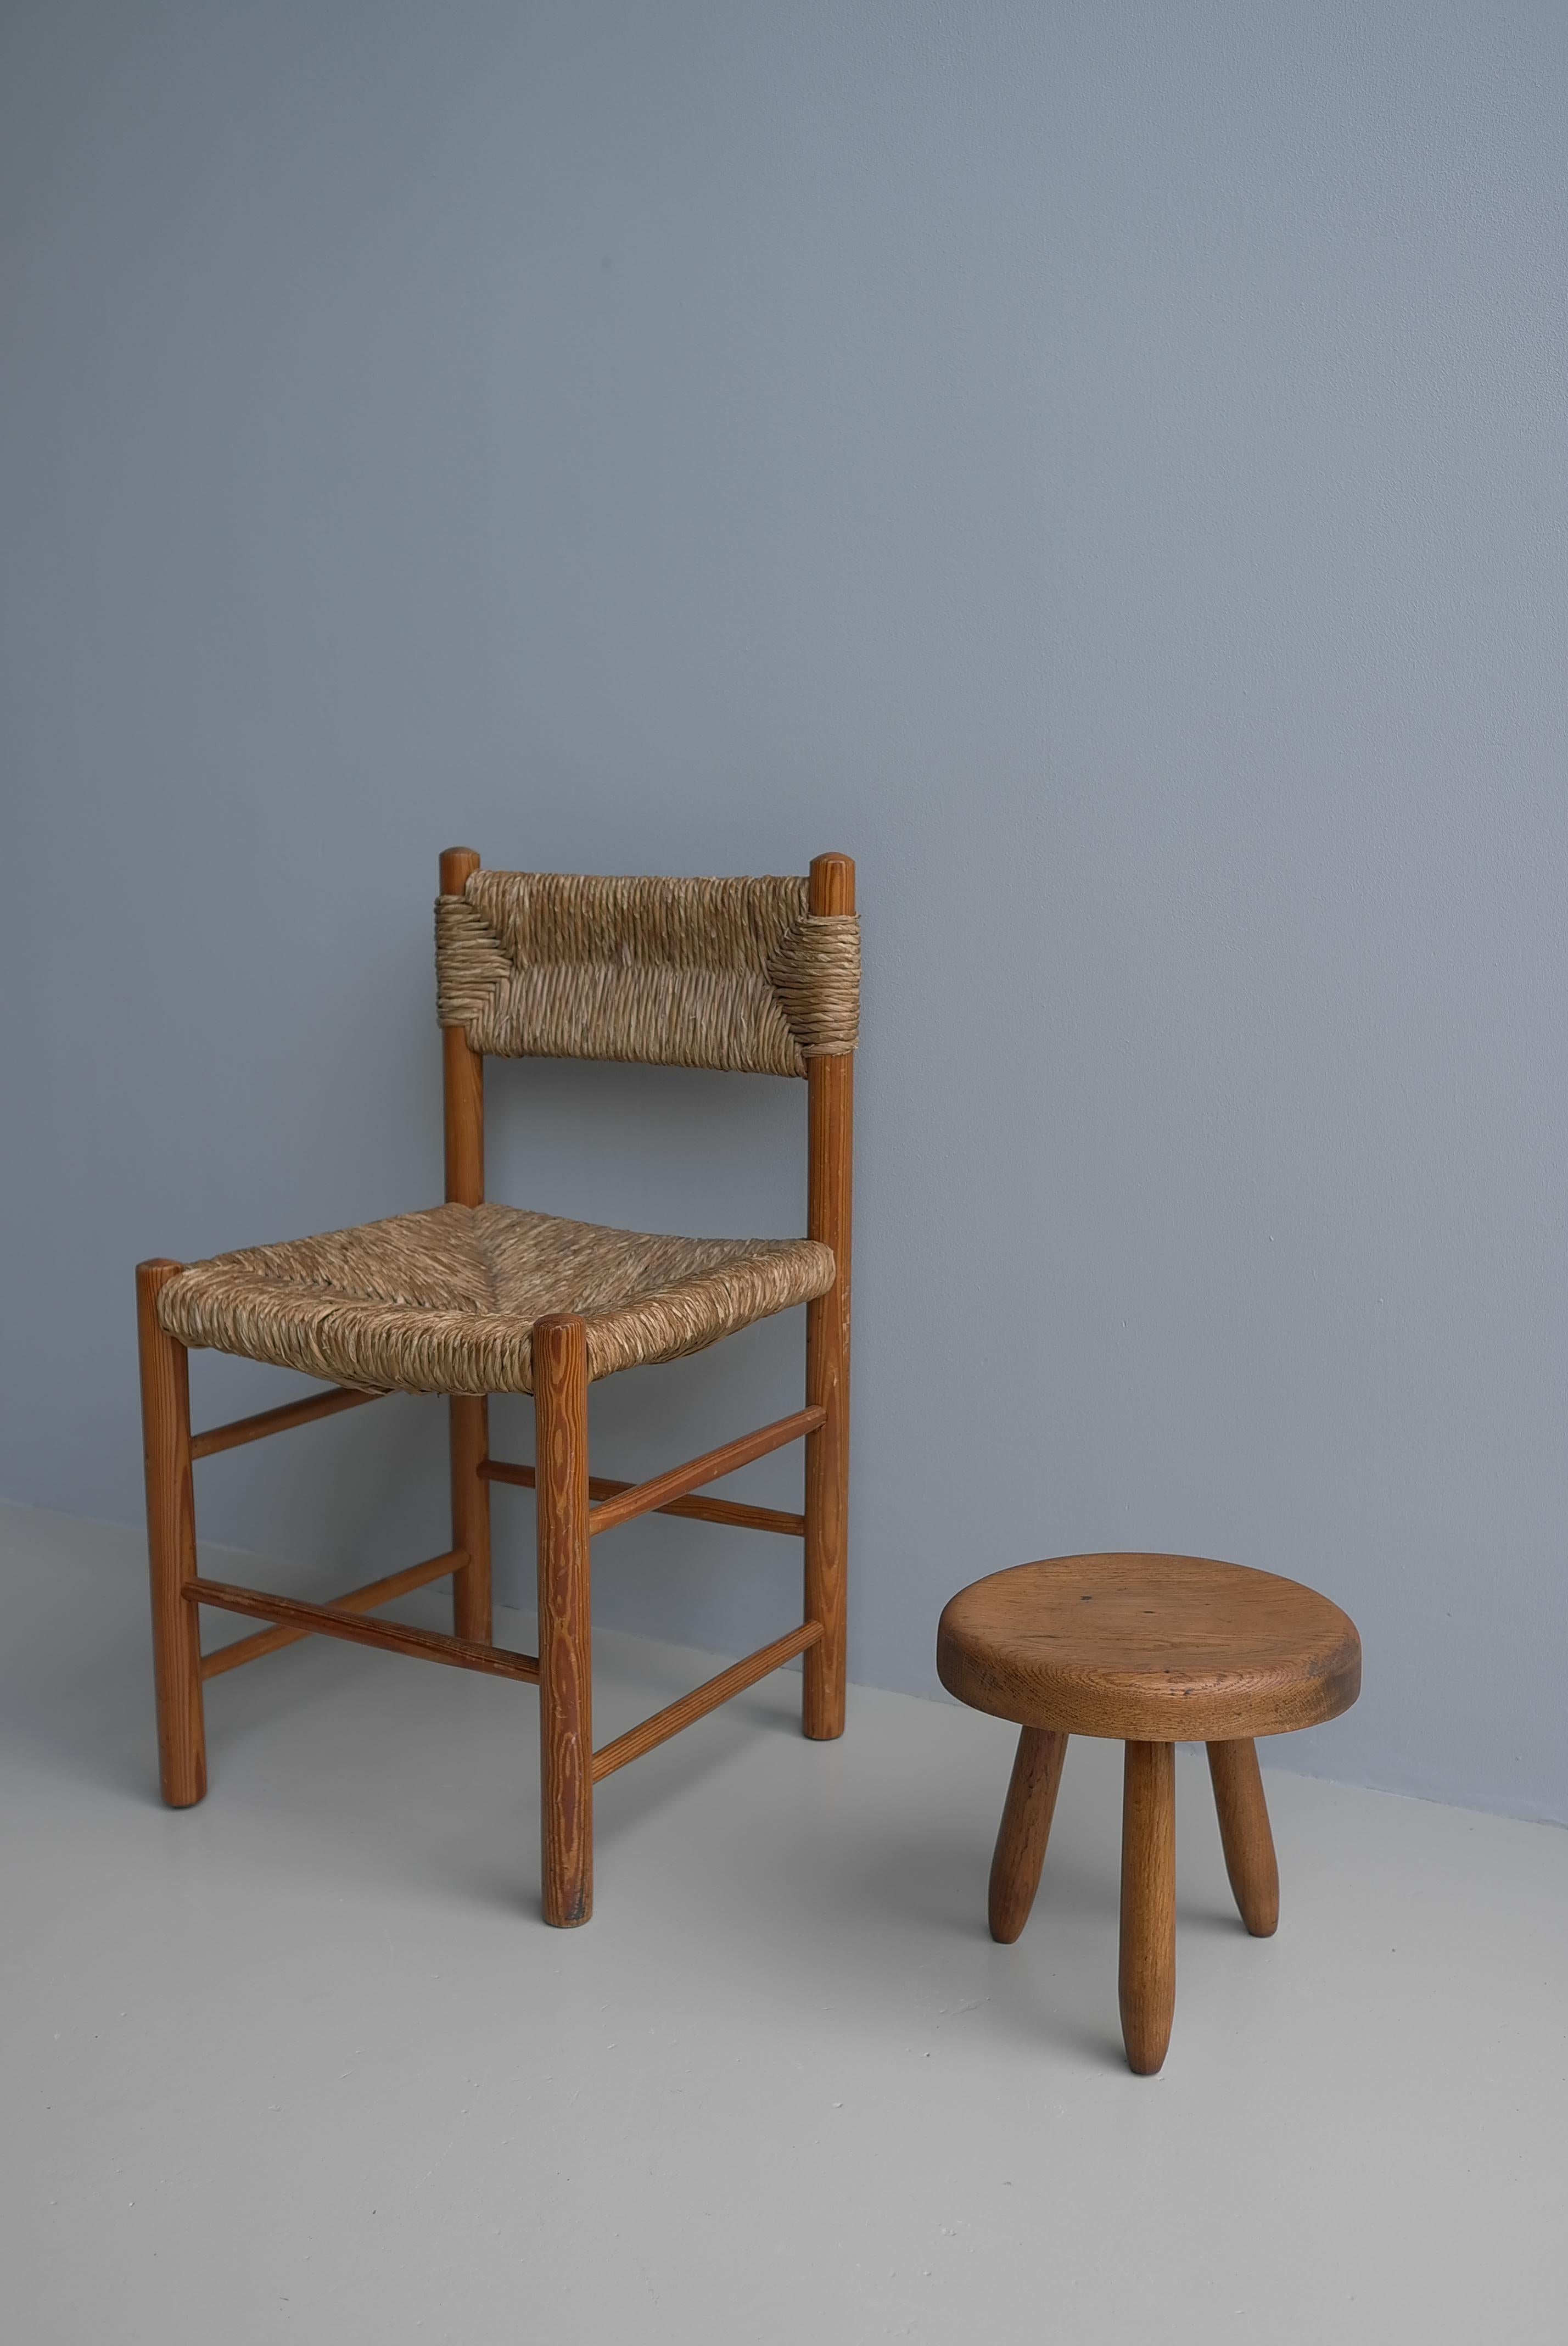 Solid Oak 'Berger' Stool in style of Charlotte Perriand, France 1950's.